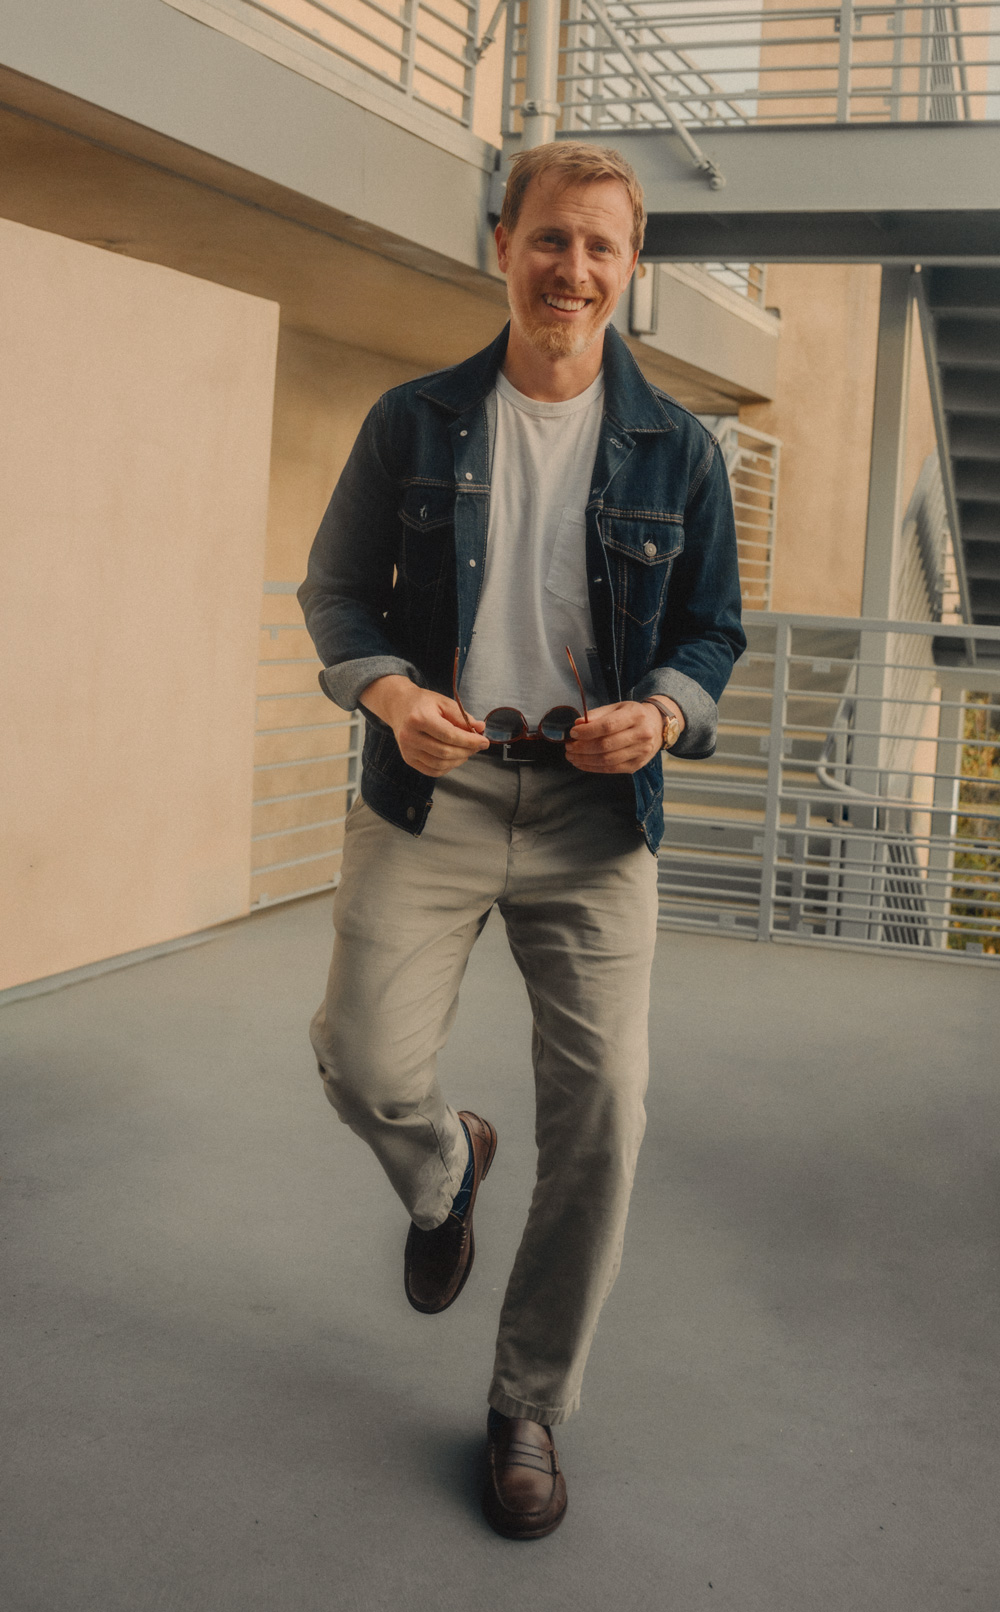 Andrew wearing a denim jacket tucked into a white t-shirt, khaki pants, and brown loafers.